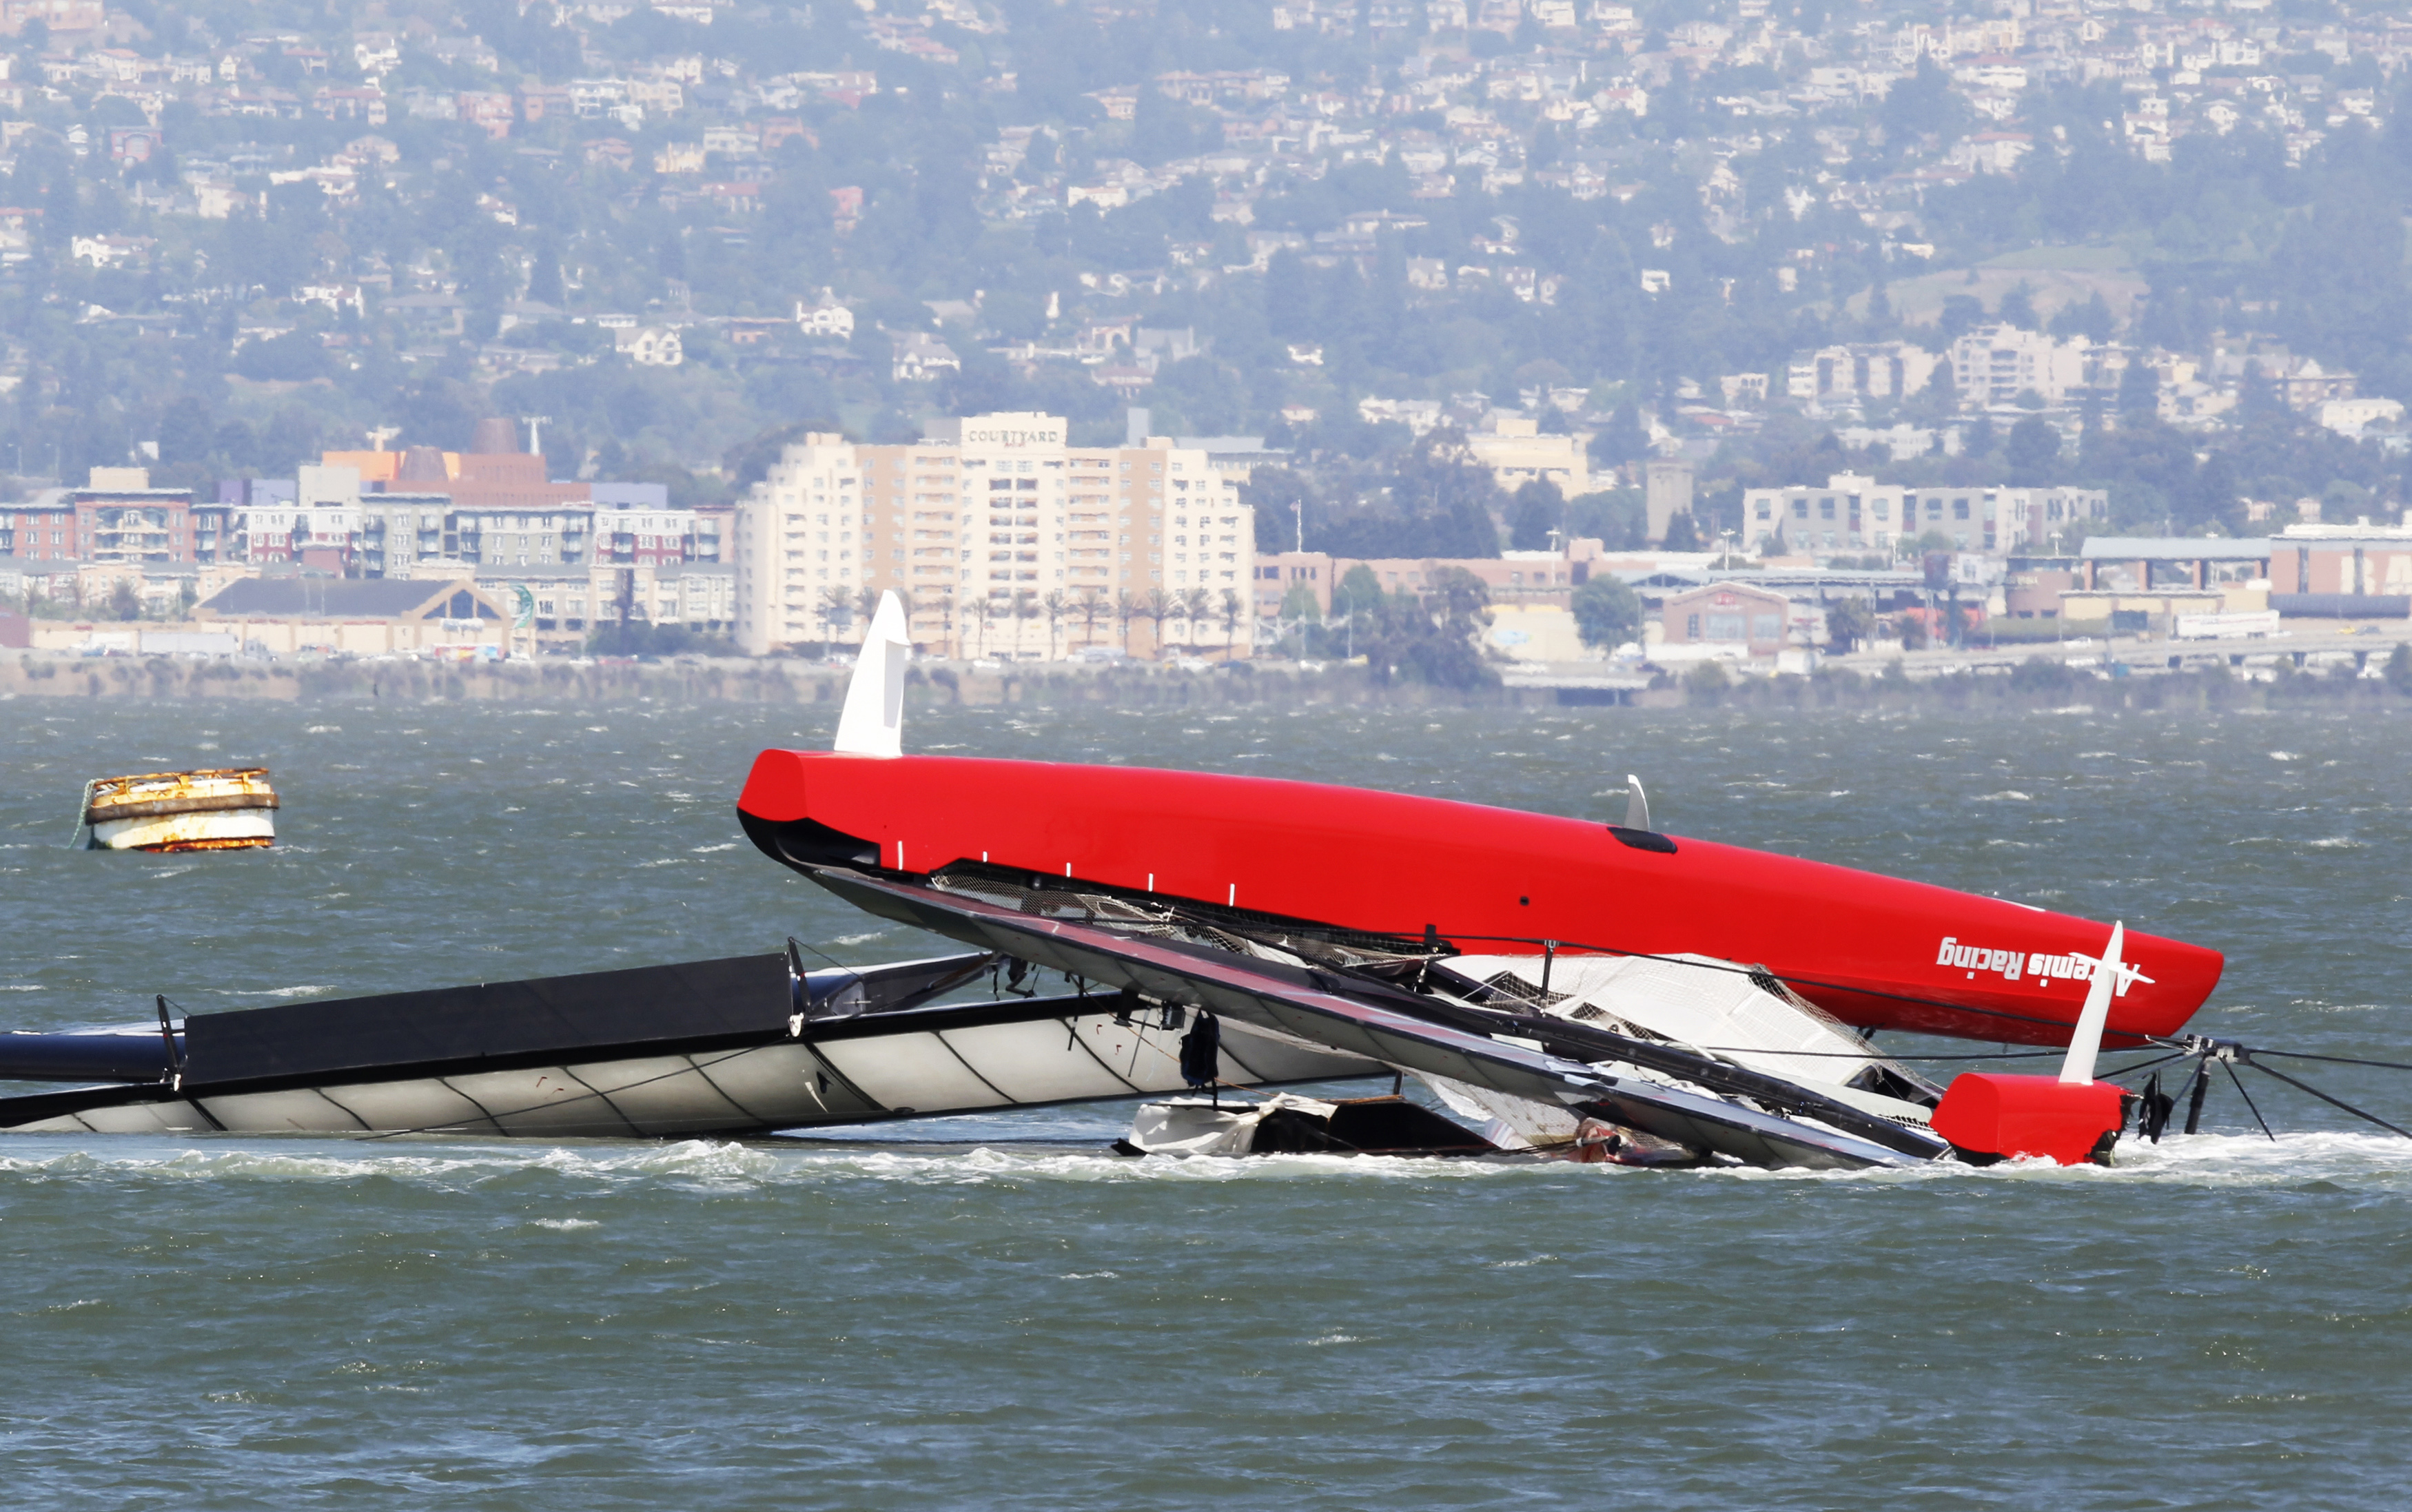 Andrew Simpson died after his boat overturned whilst training for the Americas cup (picture: Reuters)